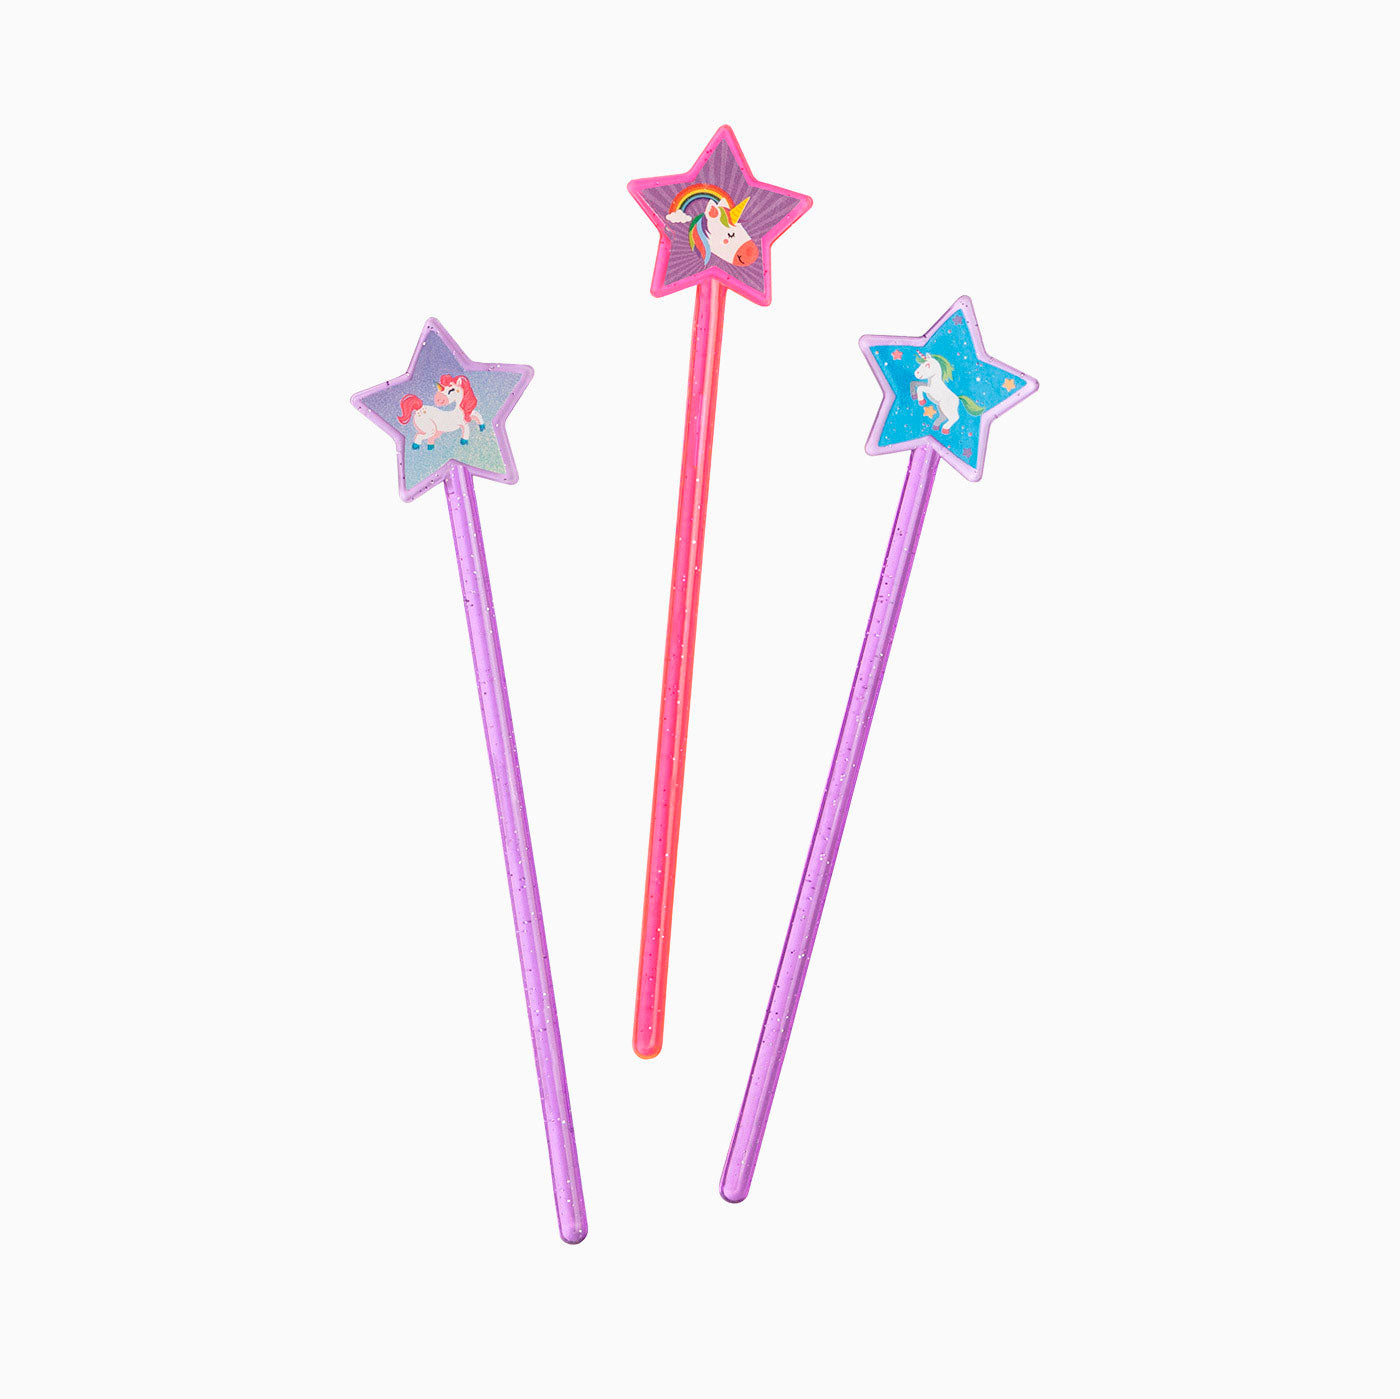 Toy unicorn wands for piñata